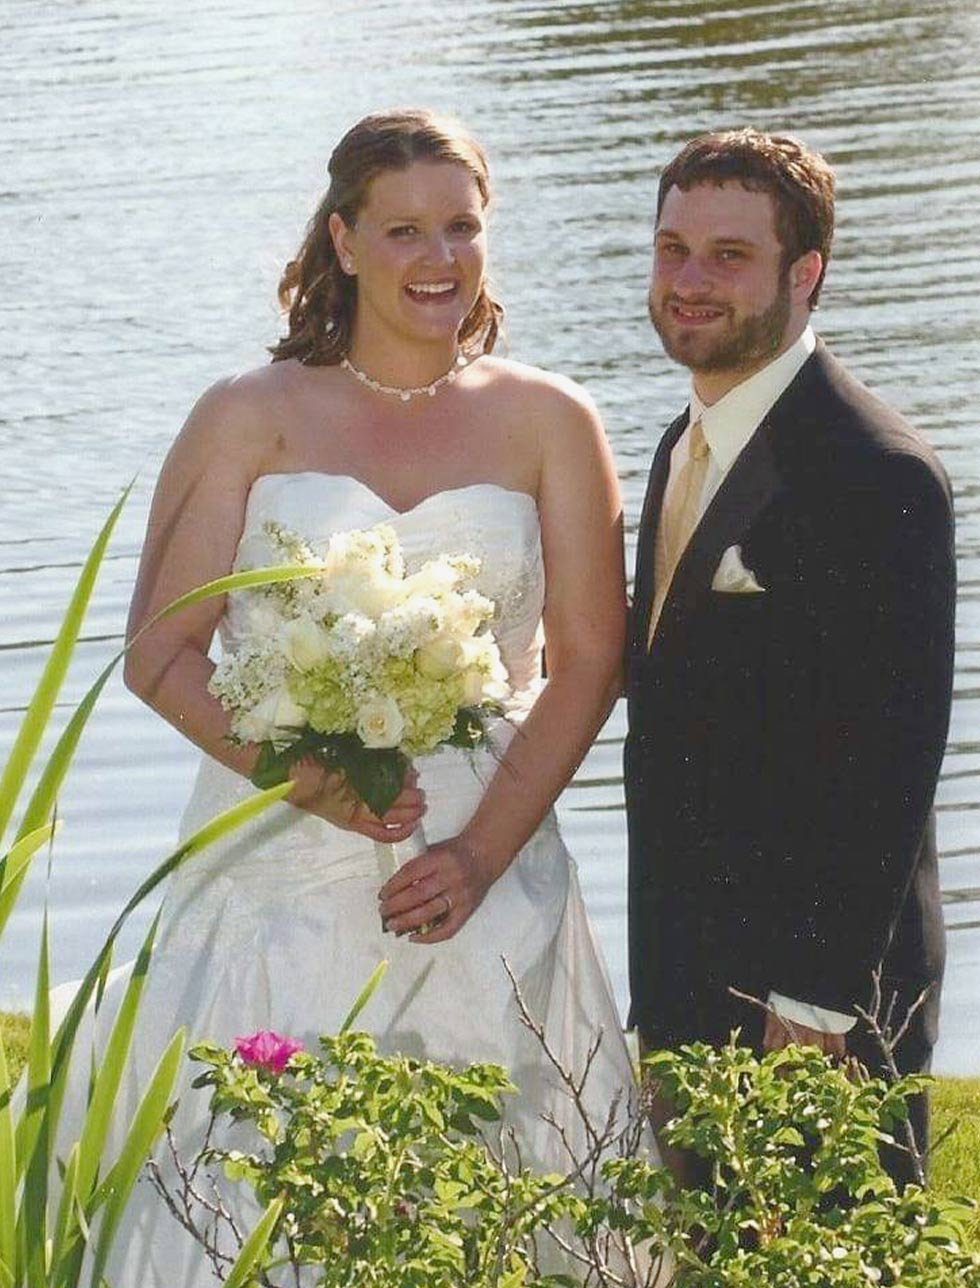 Annette Beaudoin ’06 and Joe Therrien on their wedding day in 2009.